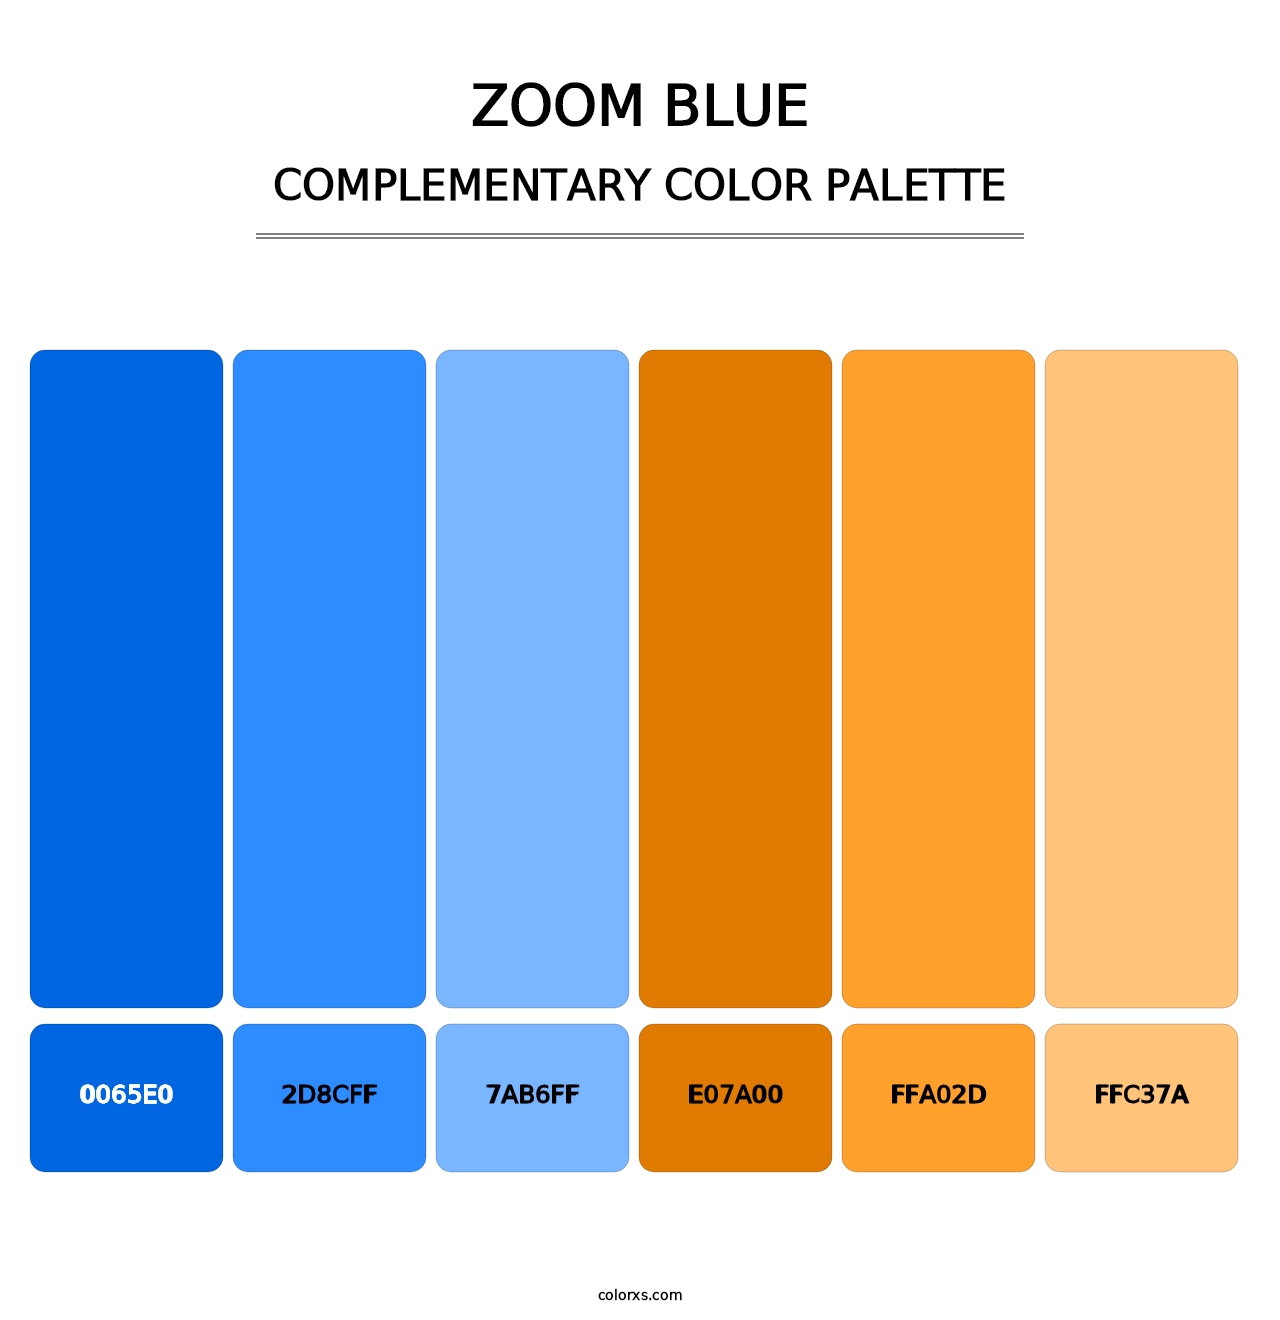 Zoom Blue - Complementary Color Palette